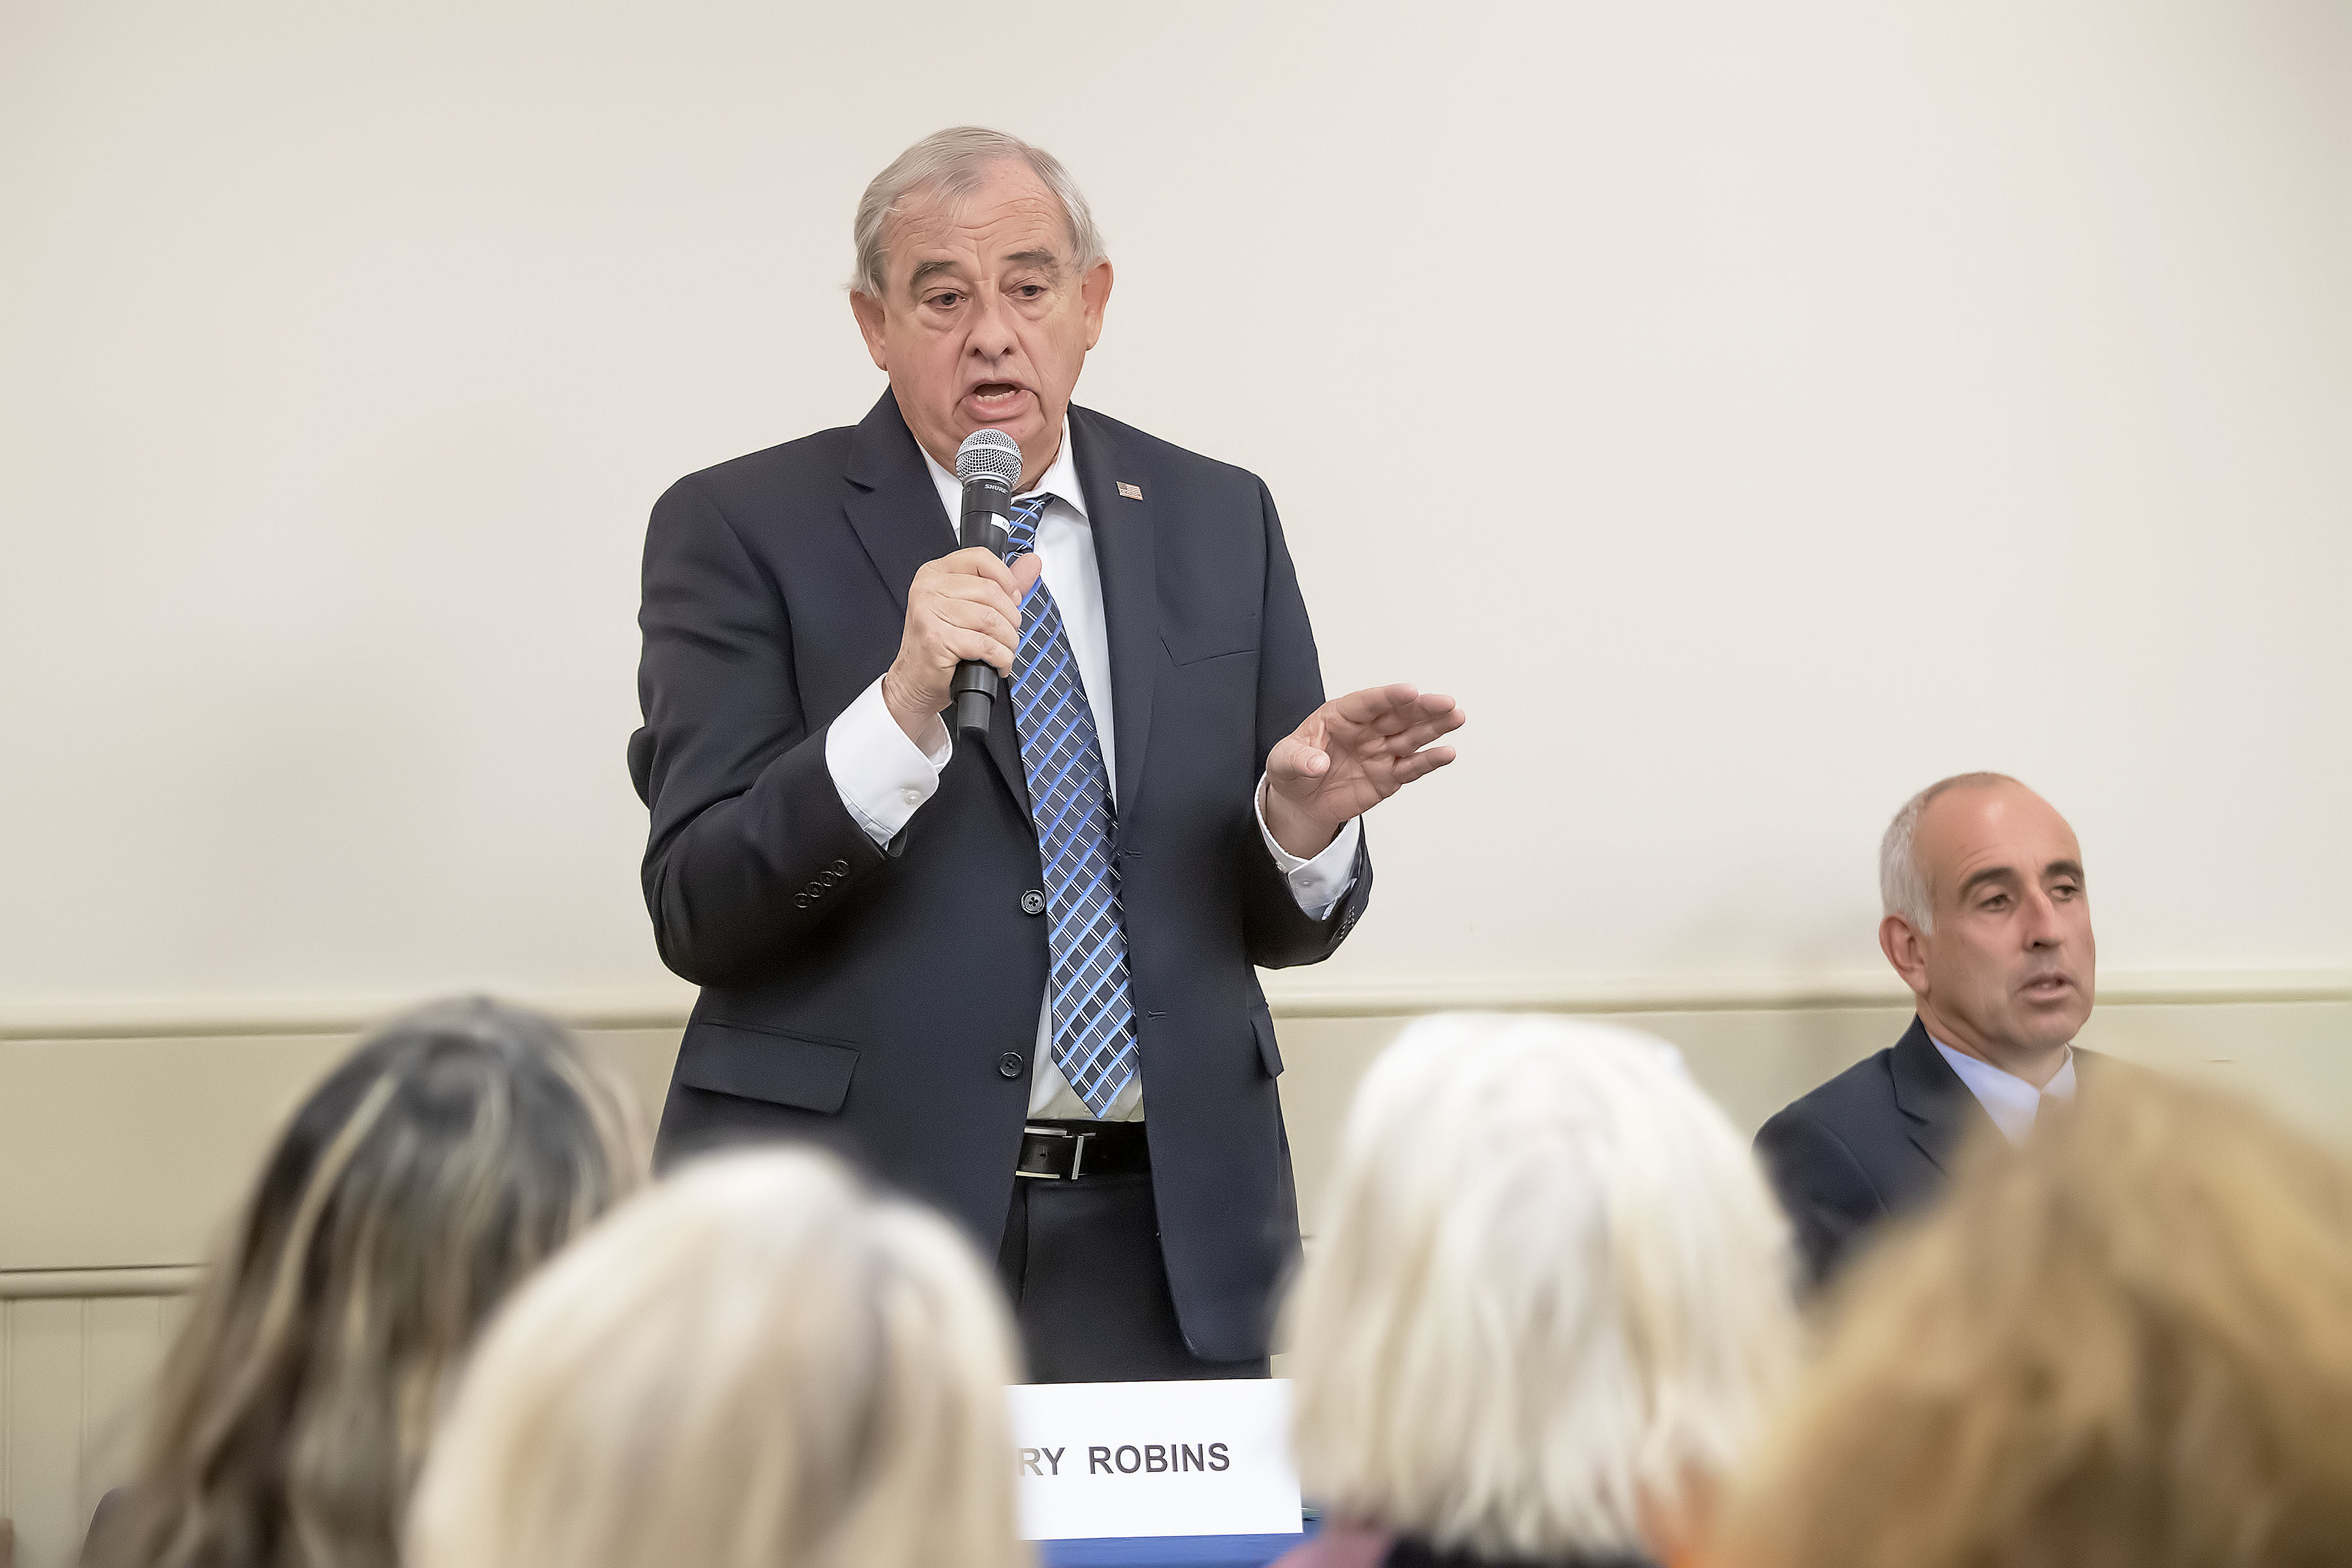 Southampton Town Supervisor Candidate Gregory Robins speaks during a Meet the Candidates Night sponsored by the League of Women Voters at the Rogers Memorial Library in Southampton on Thursday, October 17.      MICAHEL HELLER